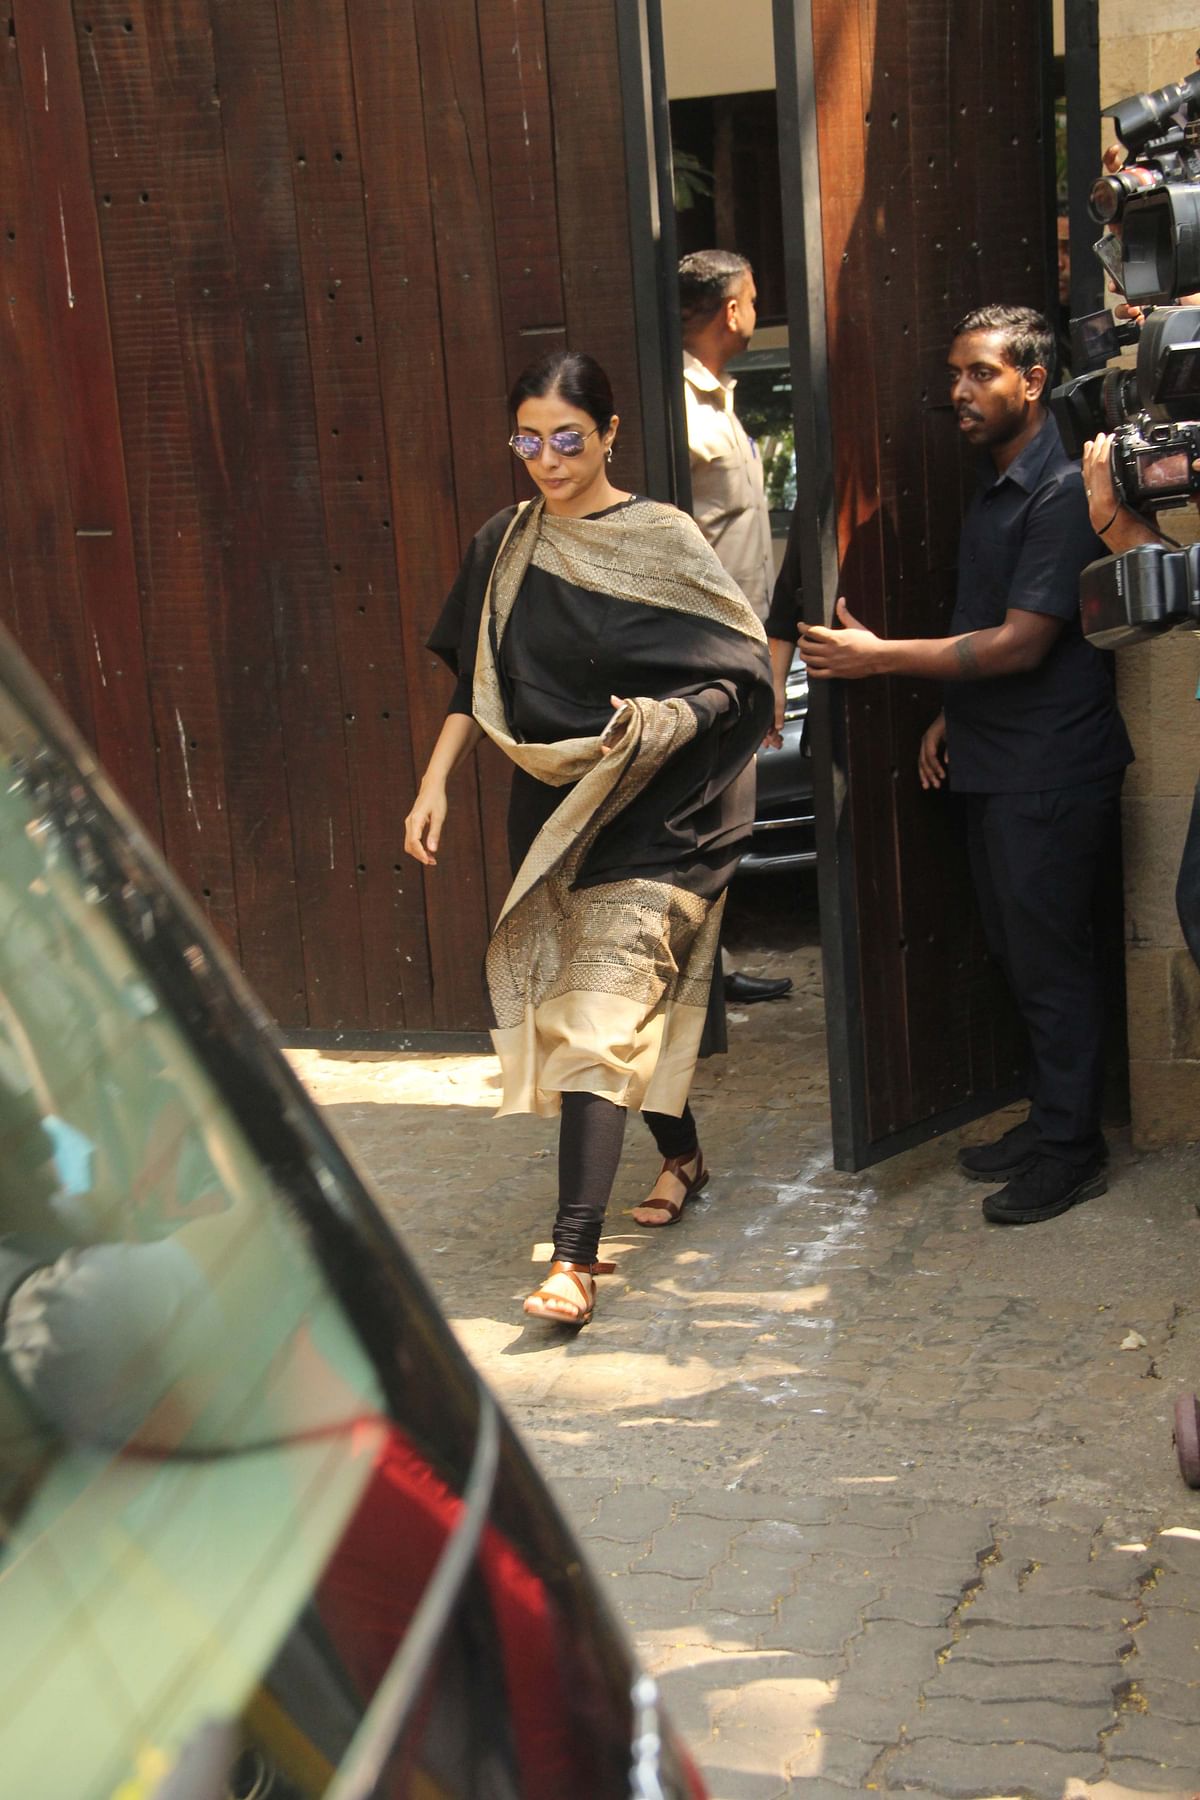 B-towners pay last respects to Sridevi at Anil Kapoor’s house.